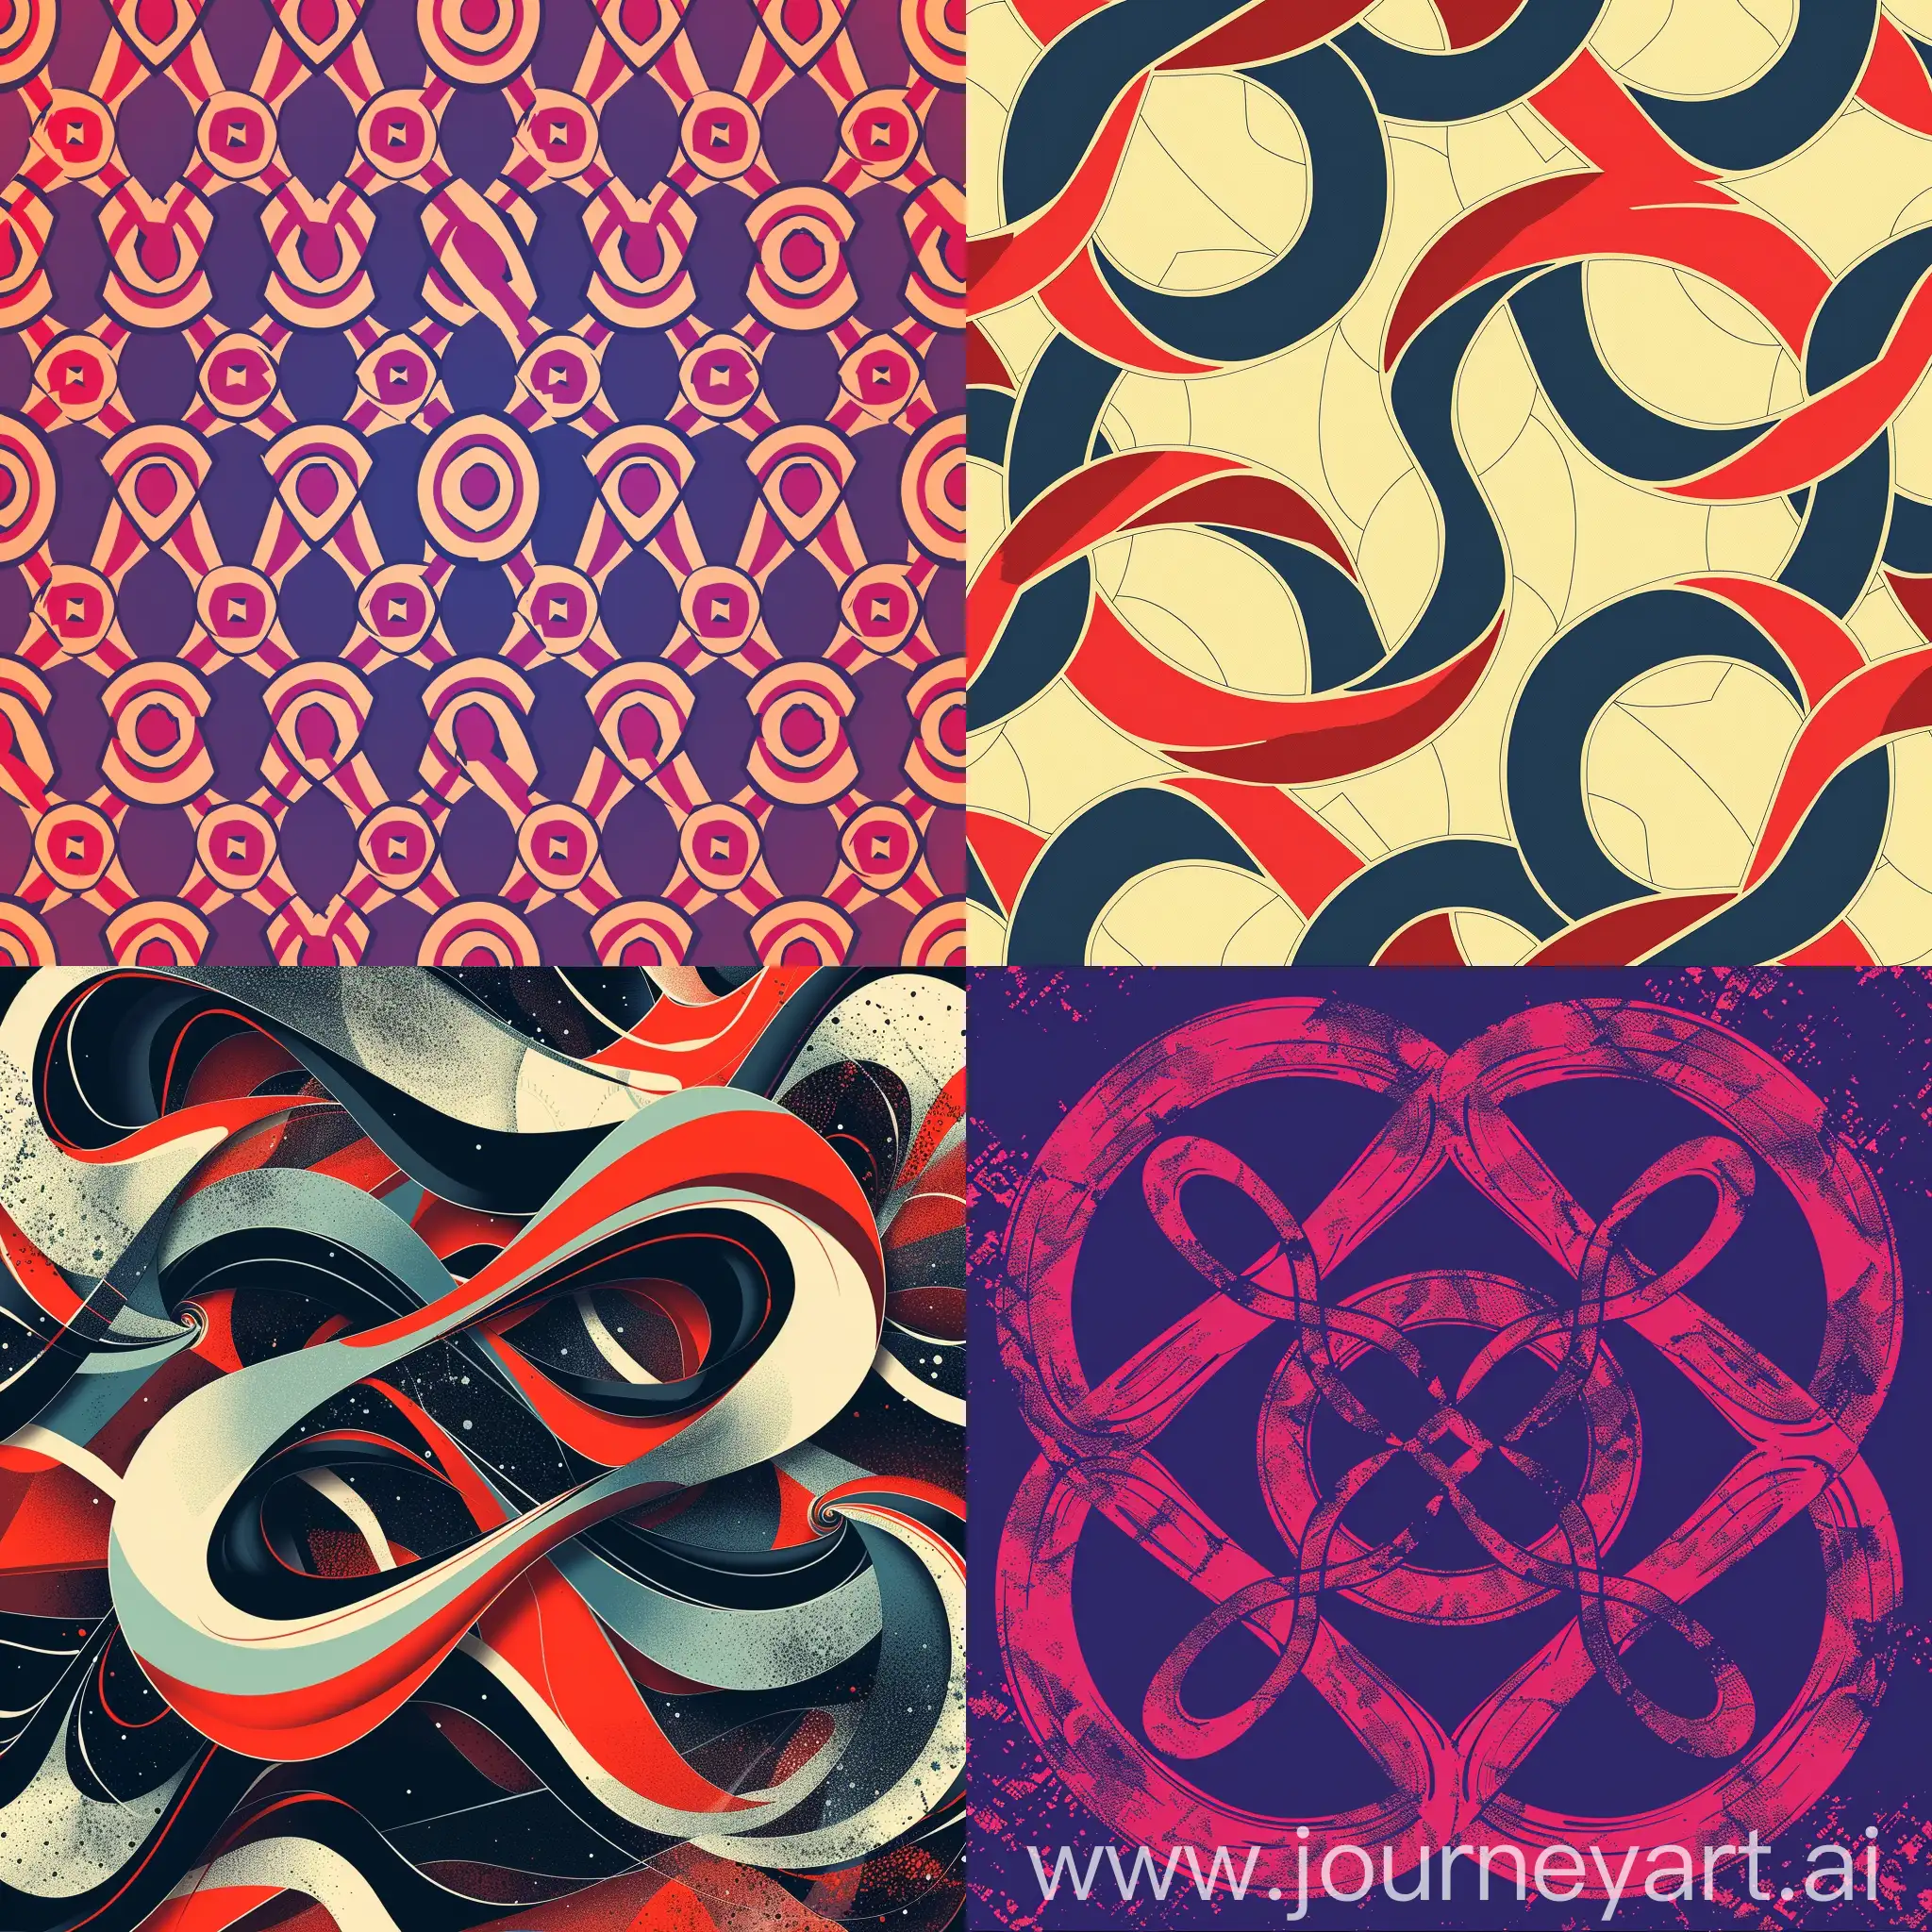 Generate me some infinity pattern material that fits the aesthetics of the European and American crowd.